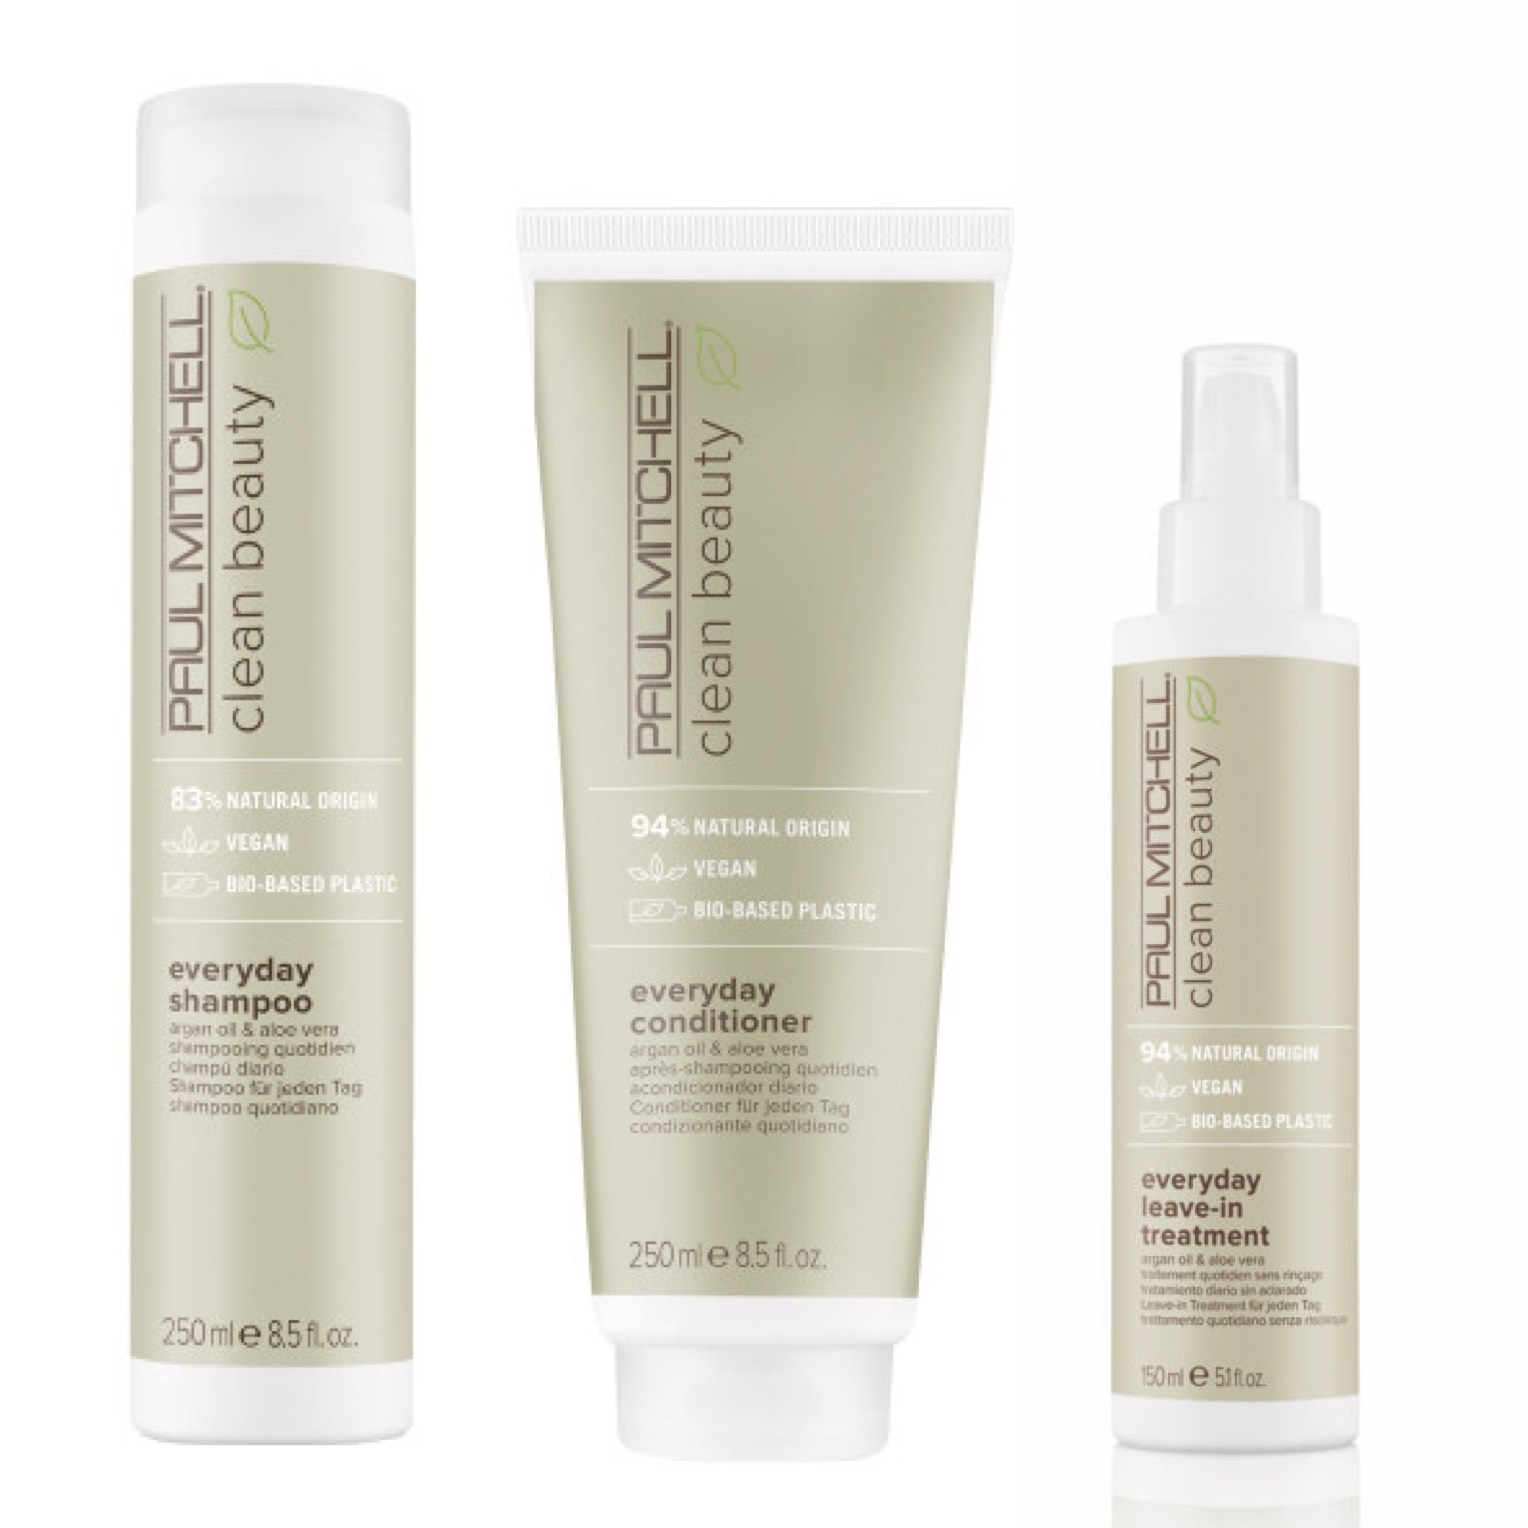 Paul Mitchell Clean Beauty Everyday Trio - Everyday Sahmpoo 250ml + Everyday Conditioner 250ml + Everyday Leave-In 150ml